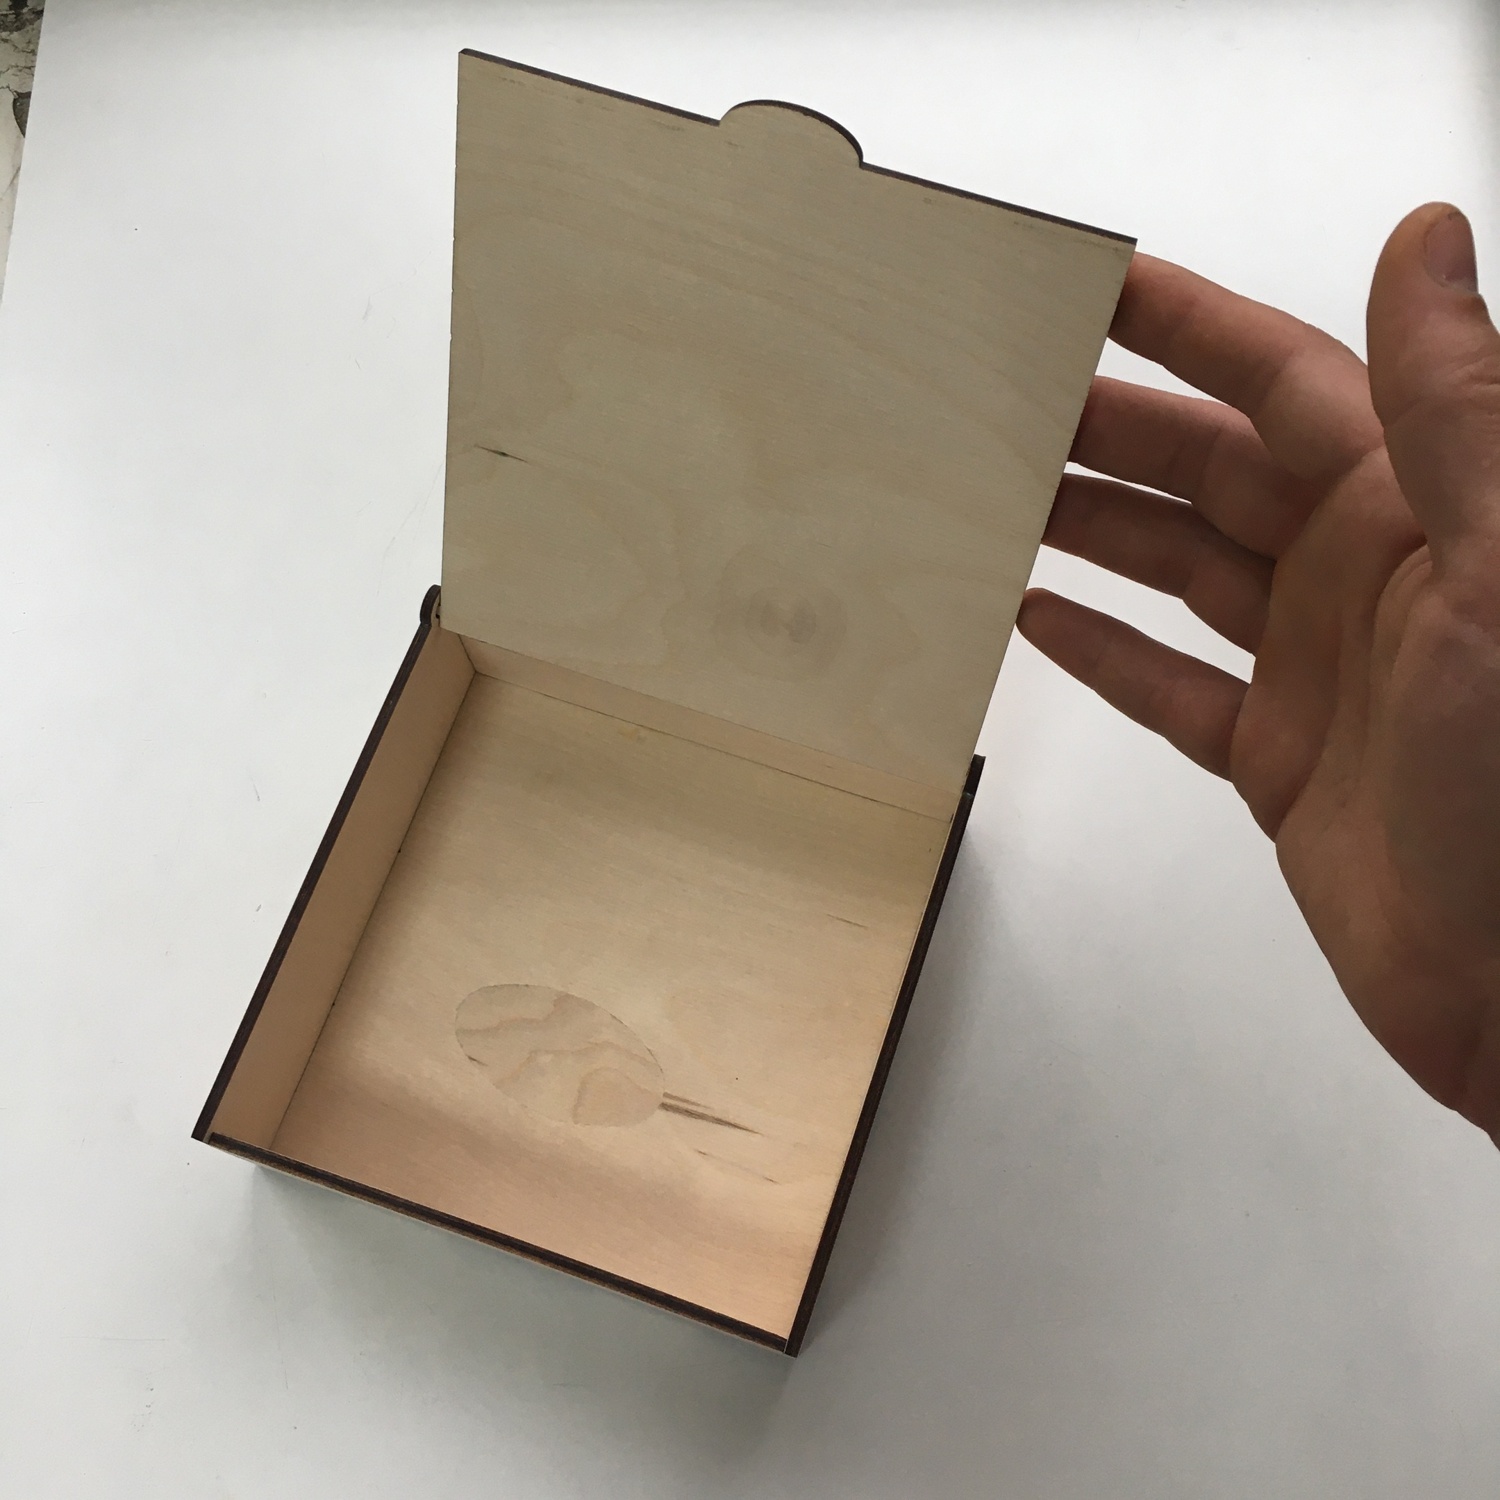 Laser Cut Wooden Engraved Box 15x15x5cm Free Vector